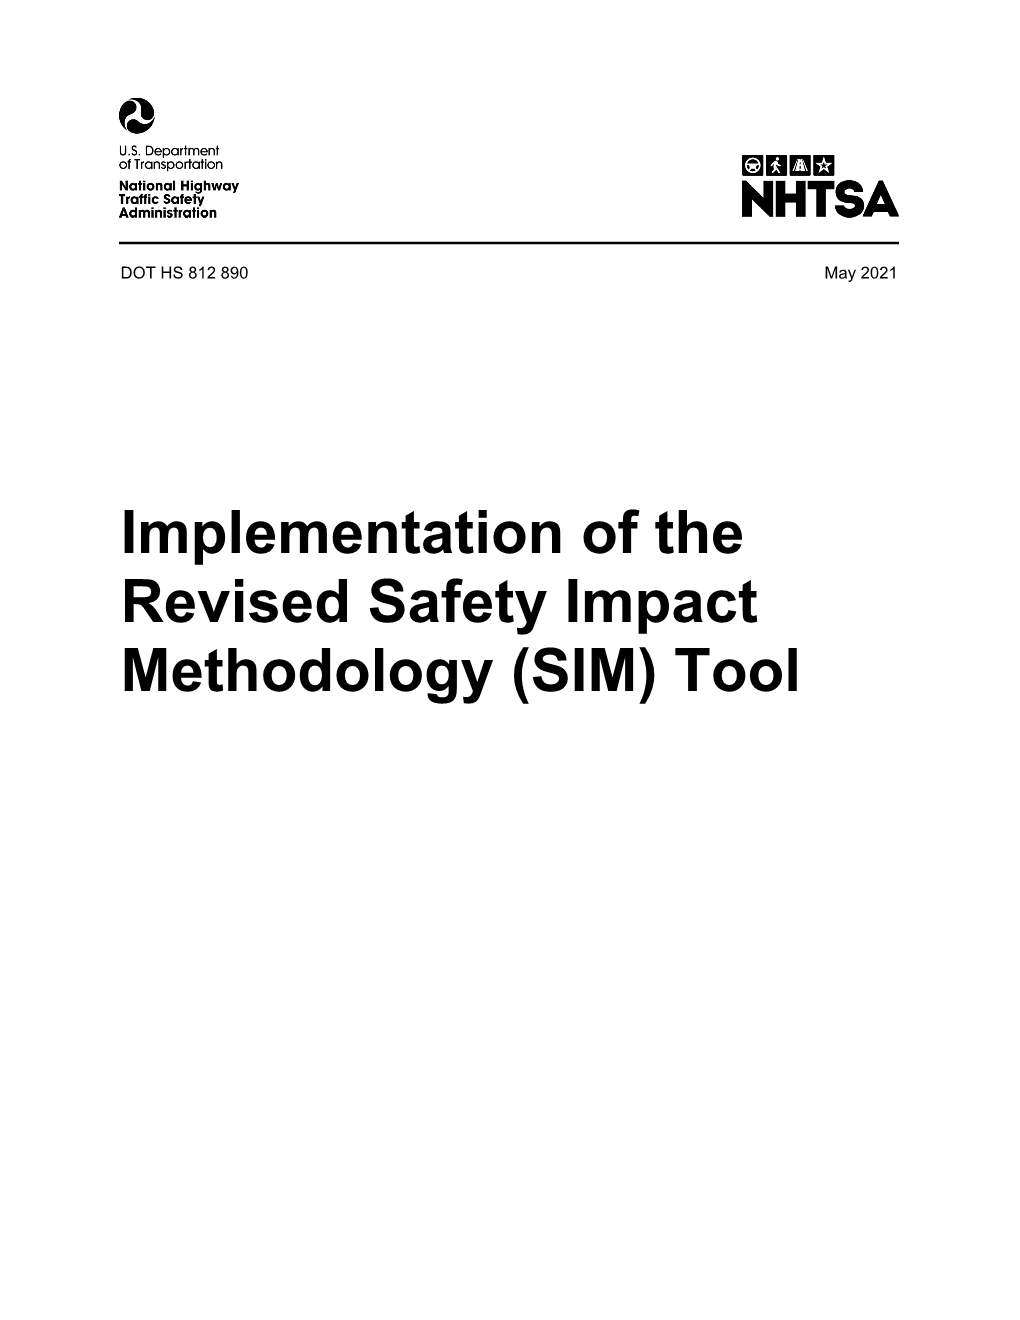 Implementation of the Revised Safety Impact Methodology (SIM) Tool DISCLAIMER